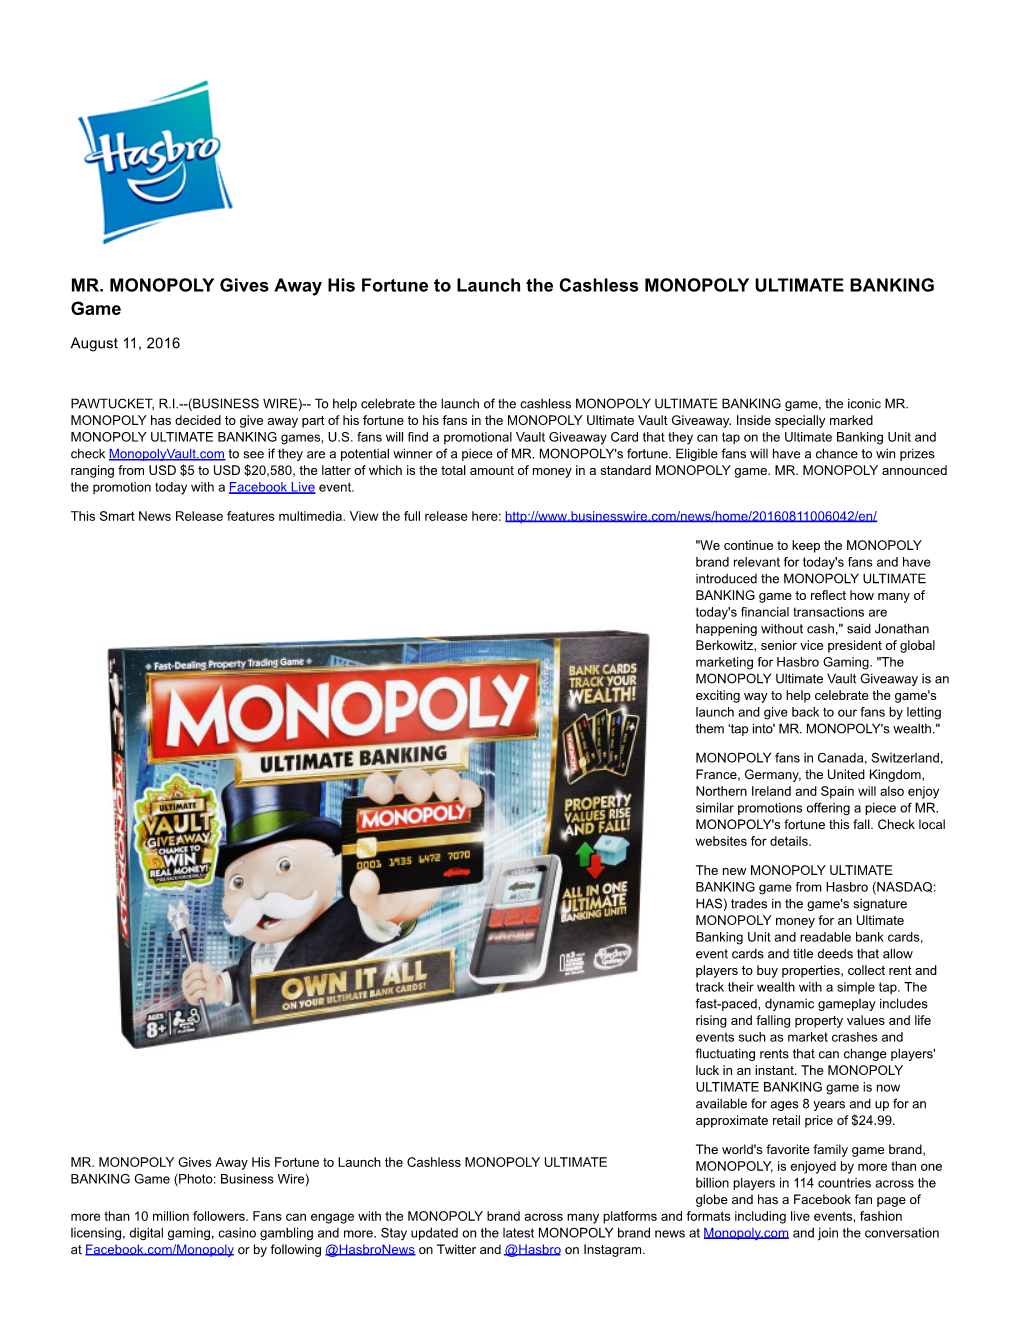 MR. MONOPOLY Gives Away His Fortune to Launch the Cashless MONOPOLY ULTIMATE BANKING Game